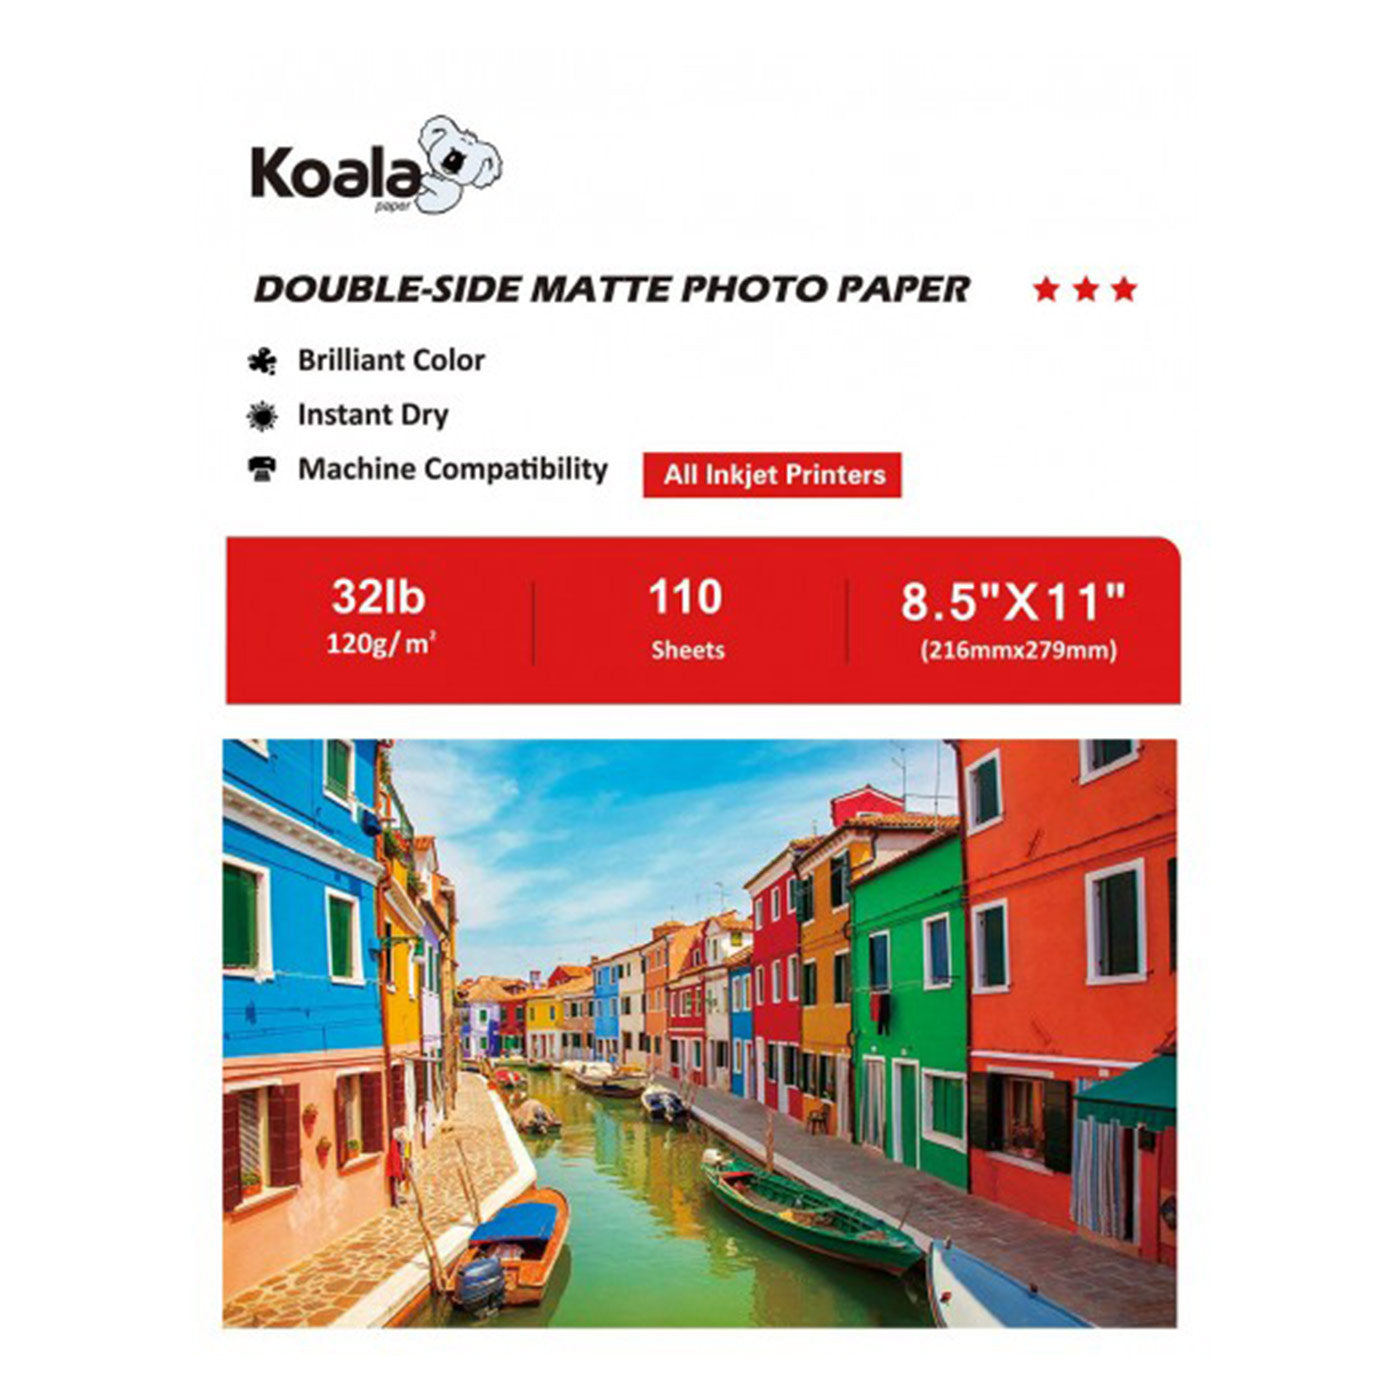 Koala Double Sided Matte Photo Paper 110 Sheets Used For All Inkjet Printers 120gsm